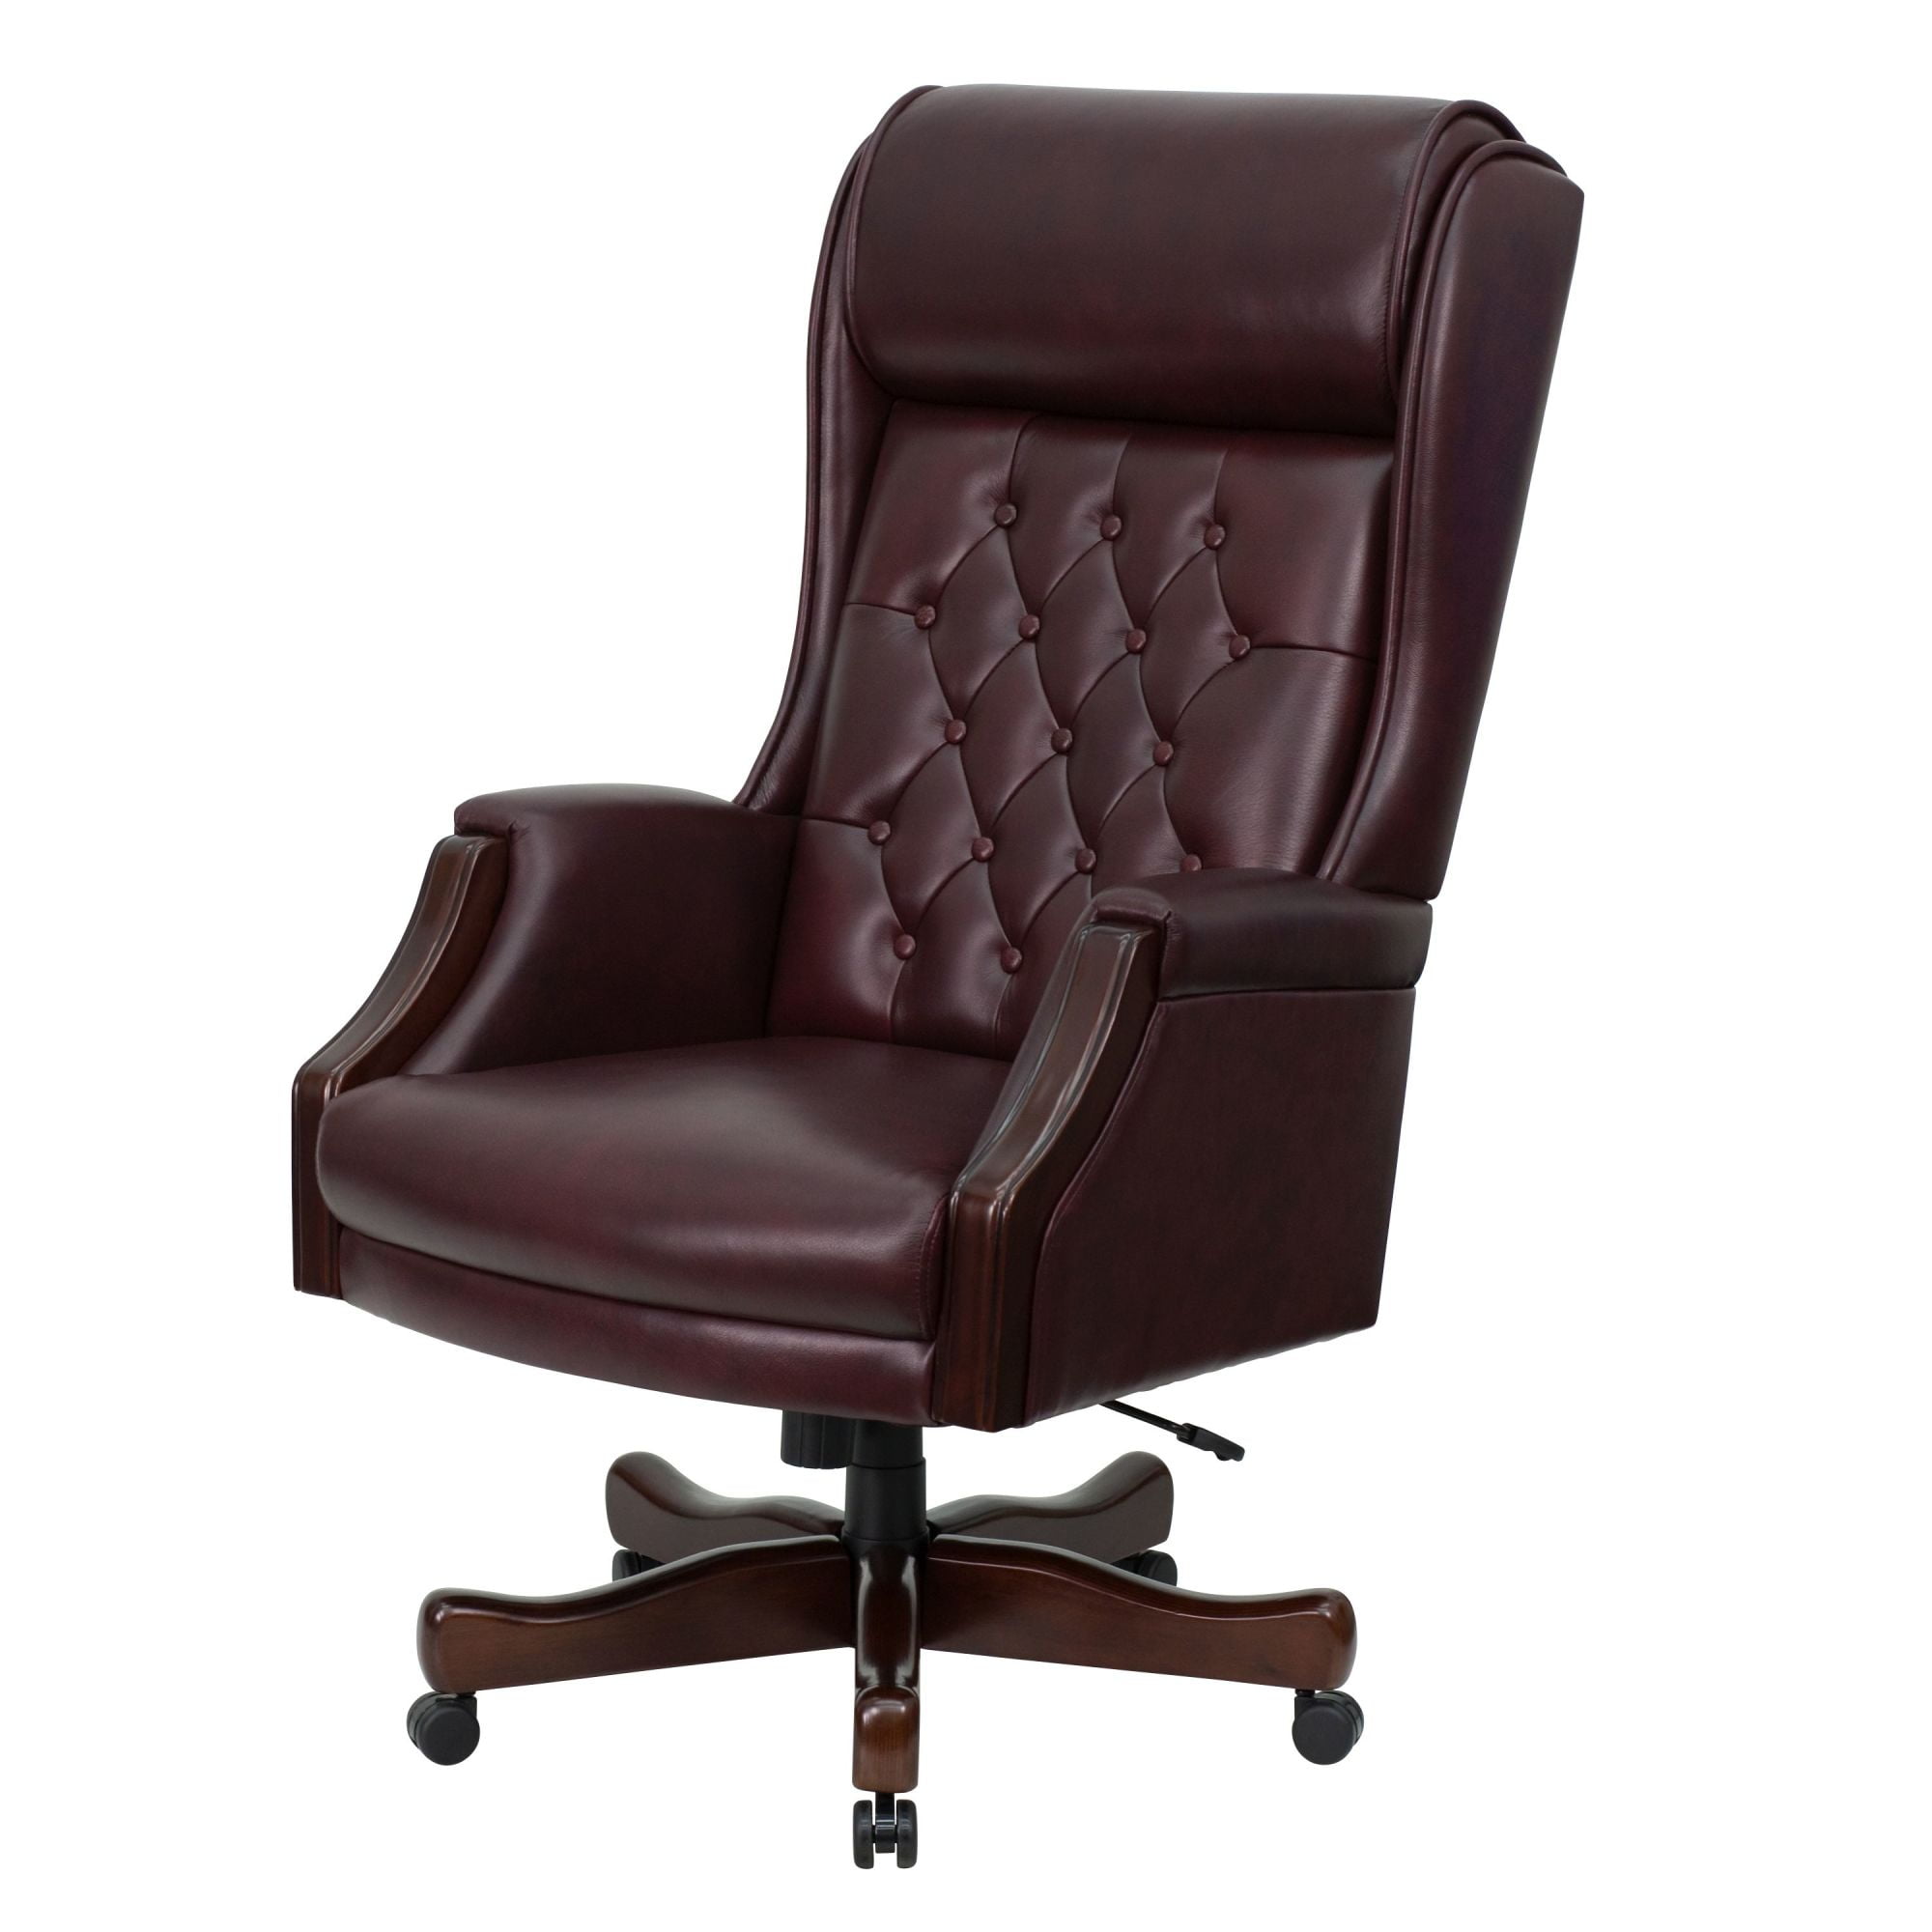 Flash Furniture Tufted Traditional Leather Executive Office Chair with Arms, Burgundy - Walmart.com